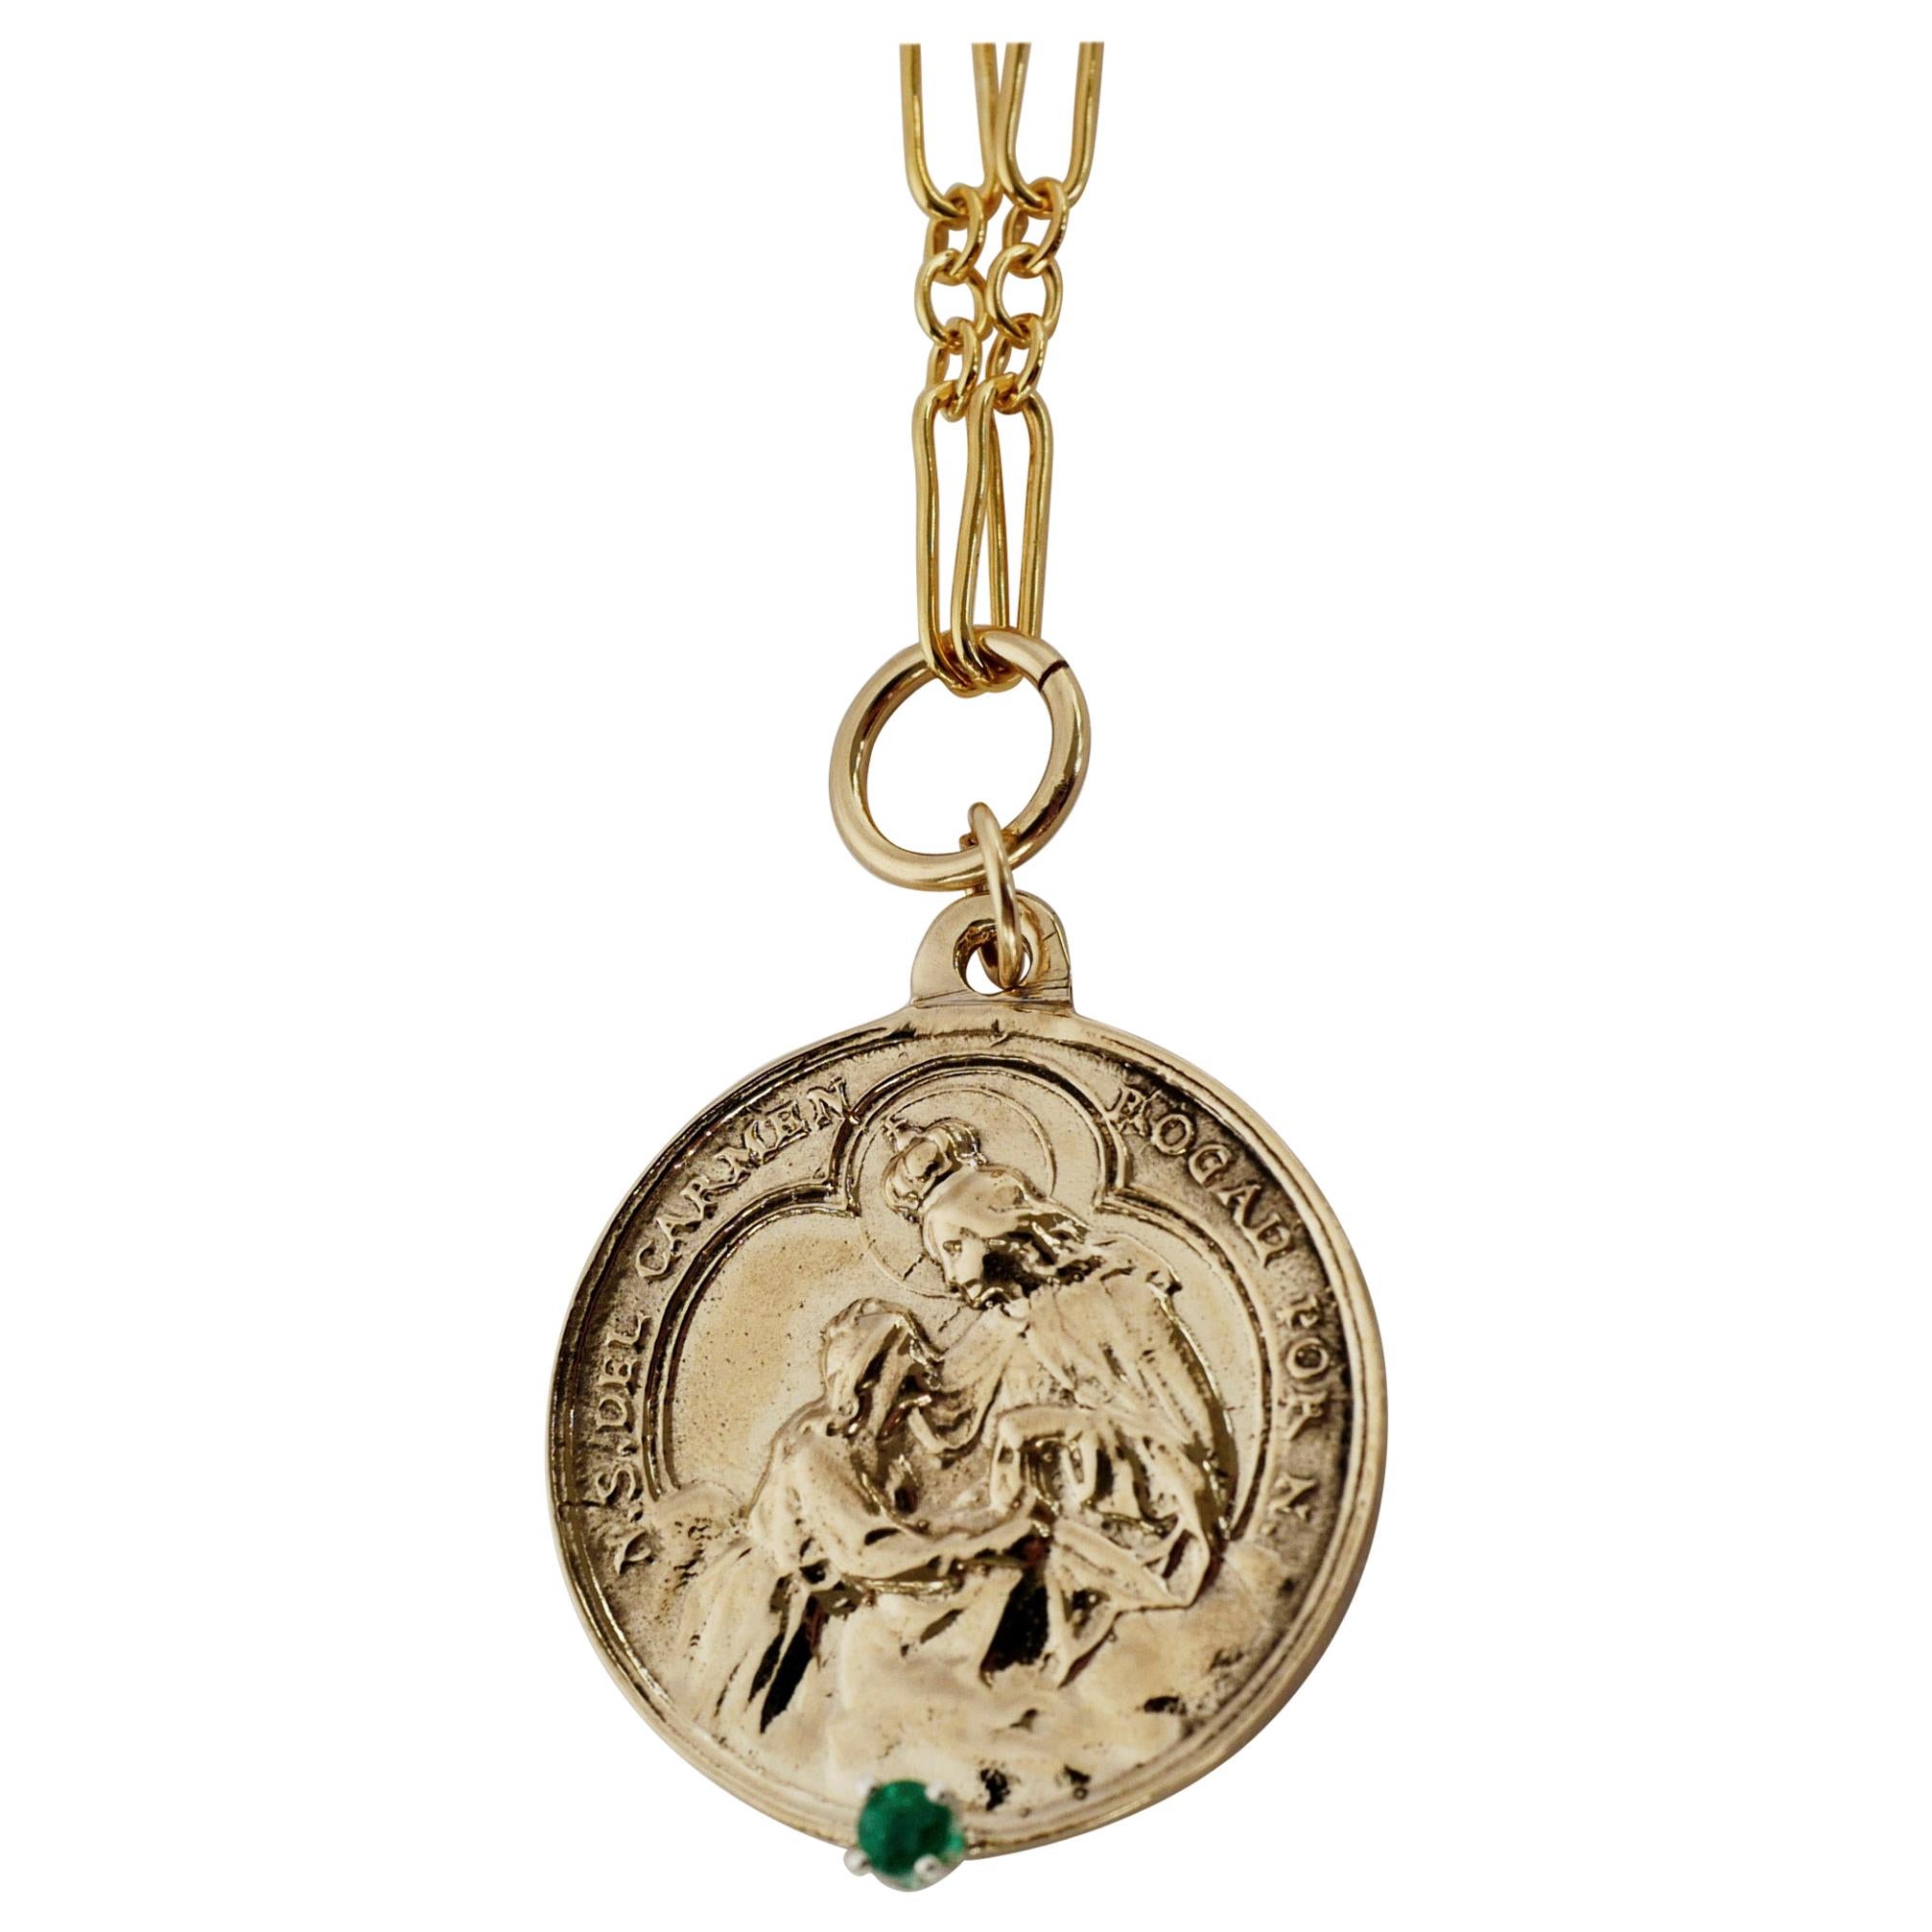 Emerald Virgin Mother Mary Medal Chunky Chain Necklace Gold J Dauphin